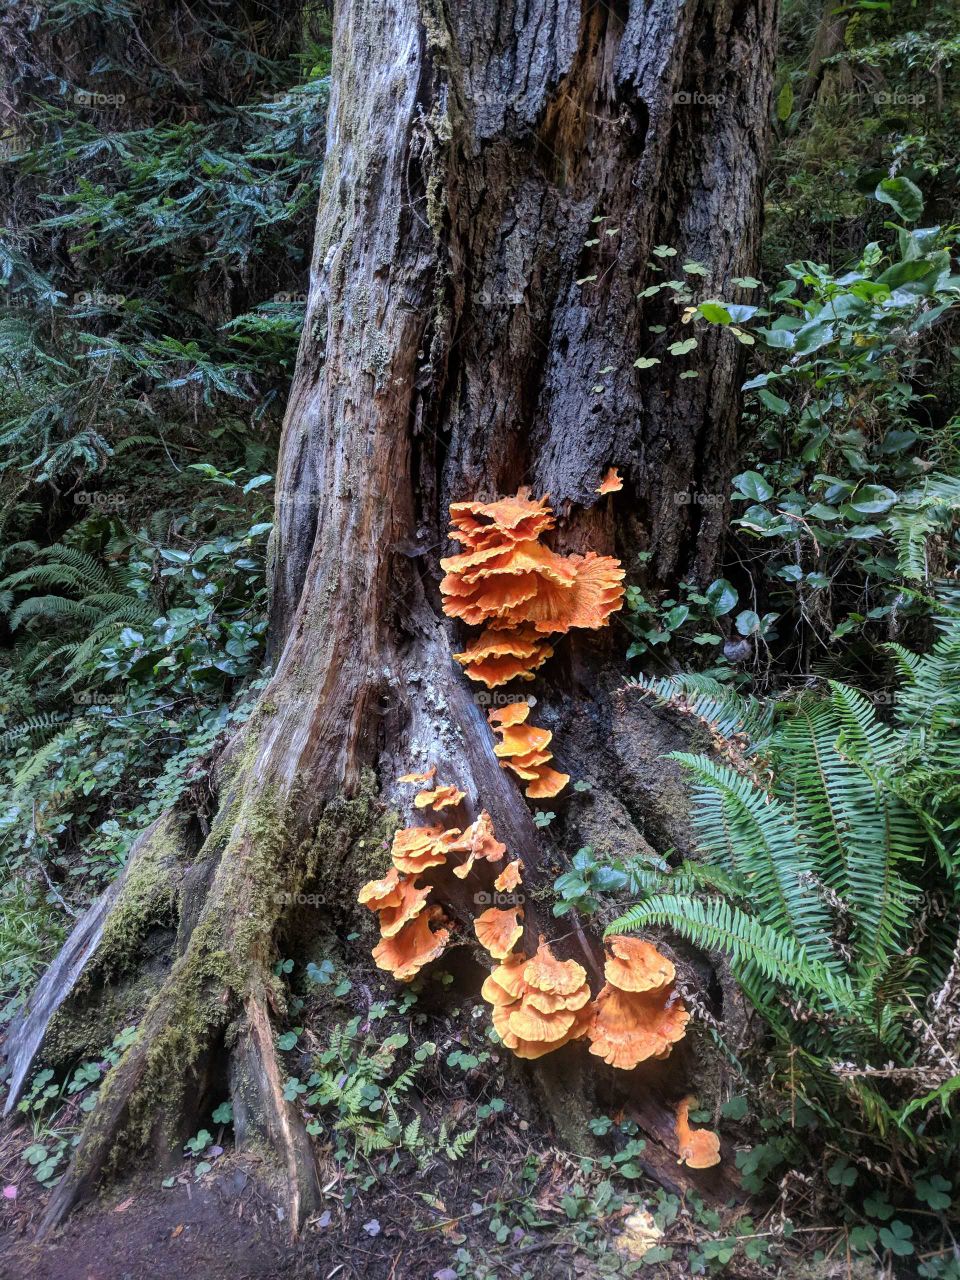 Bright Orange Fungus Growing on Redwood Tree in the Forest/Grove of Redwood National Park in Northern California